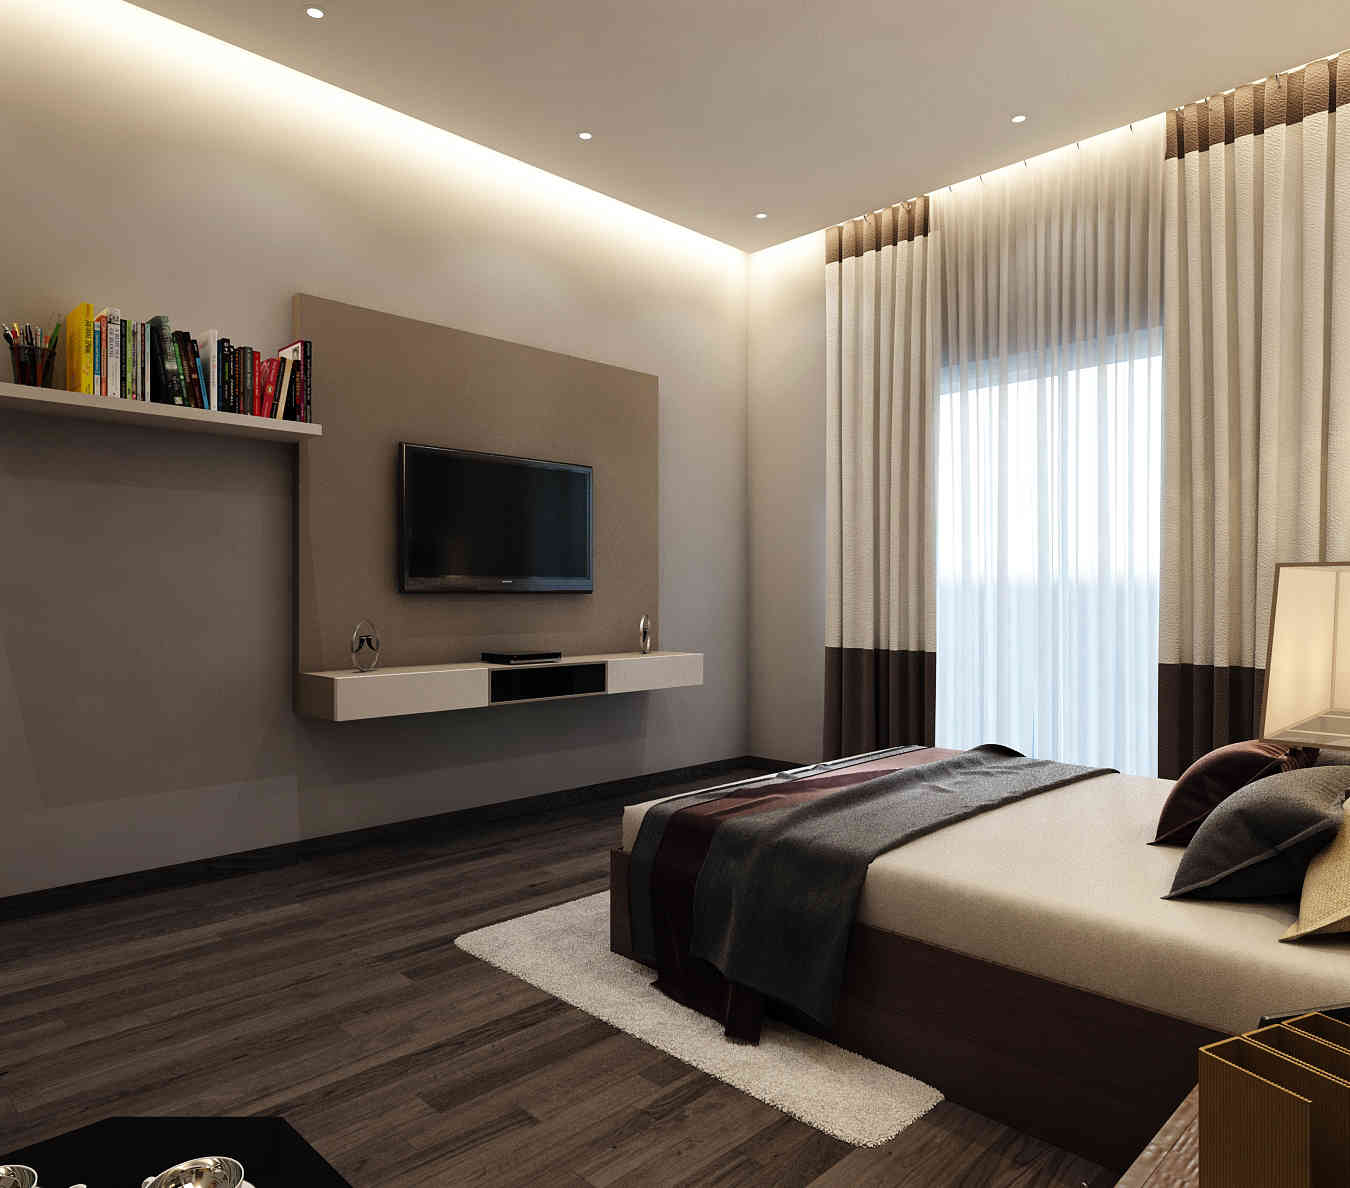 Modern Bedroom With TV Unit